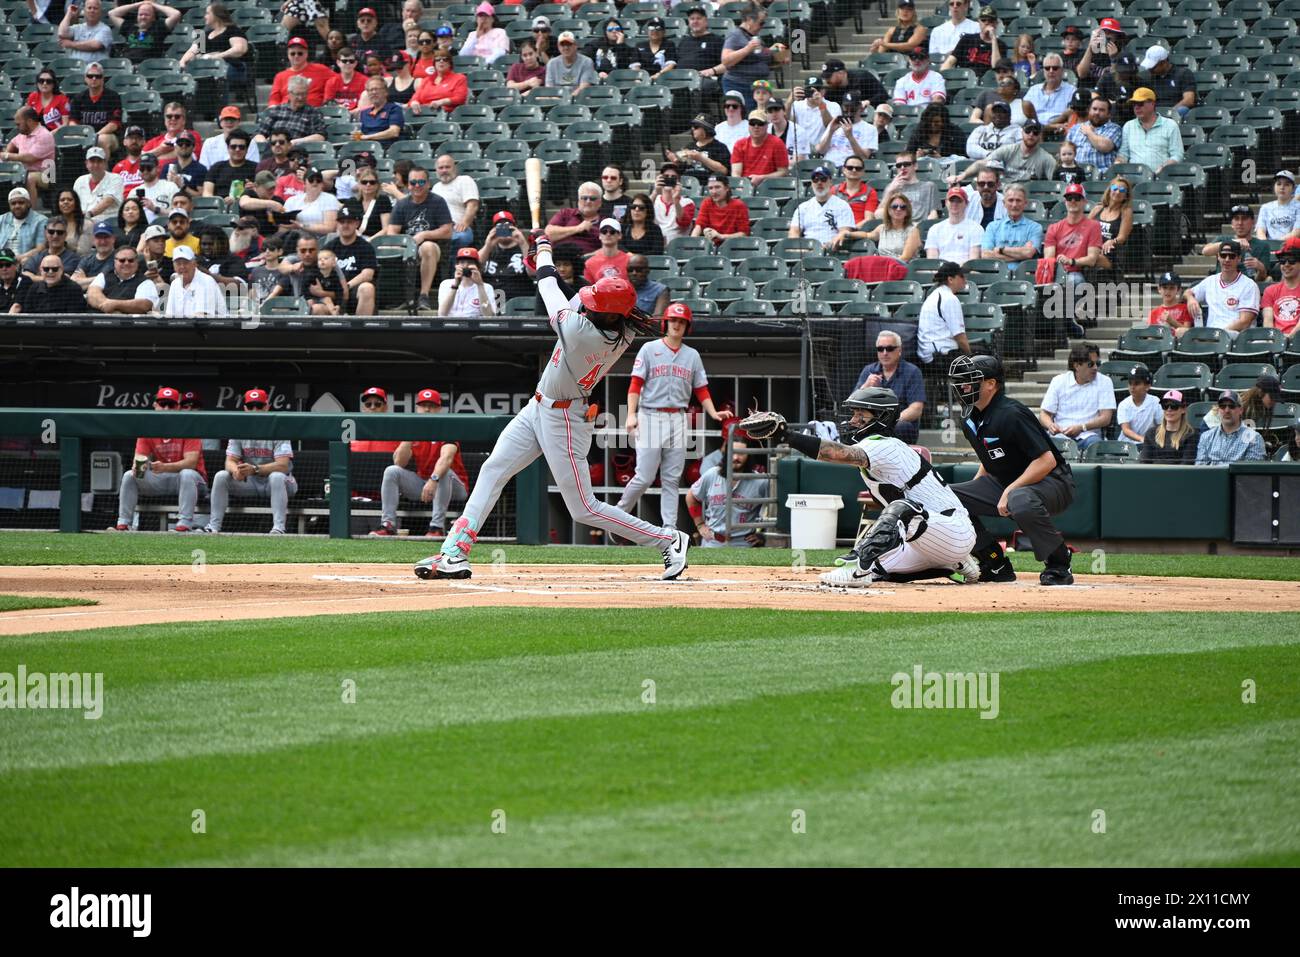 Chicago, United States. 14th Apr, 2024. Elly De La Cruz #44 of the Cincinnati Reds at bat during Sunday's Major League Baseball game where the Cincinnati Reds are playing against the Chicago White Sox at Guaranteed Rate Field in Chicago, Illinois, United States on April 14, 2024. The Cincinnati Reds swept the Chicago White Sox for all three games of the series, they won Sunday's game with a score of 11-4. Credit: SOPA Images Limited/Alamy Live News Stock Photo